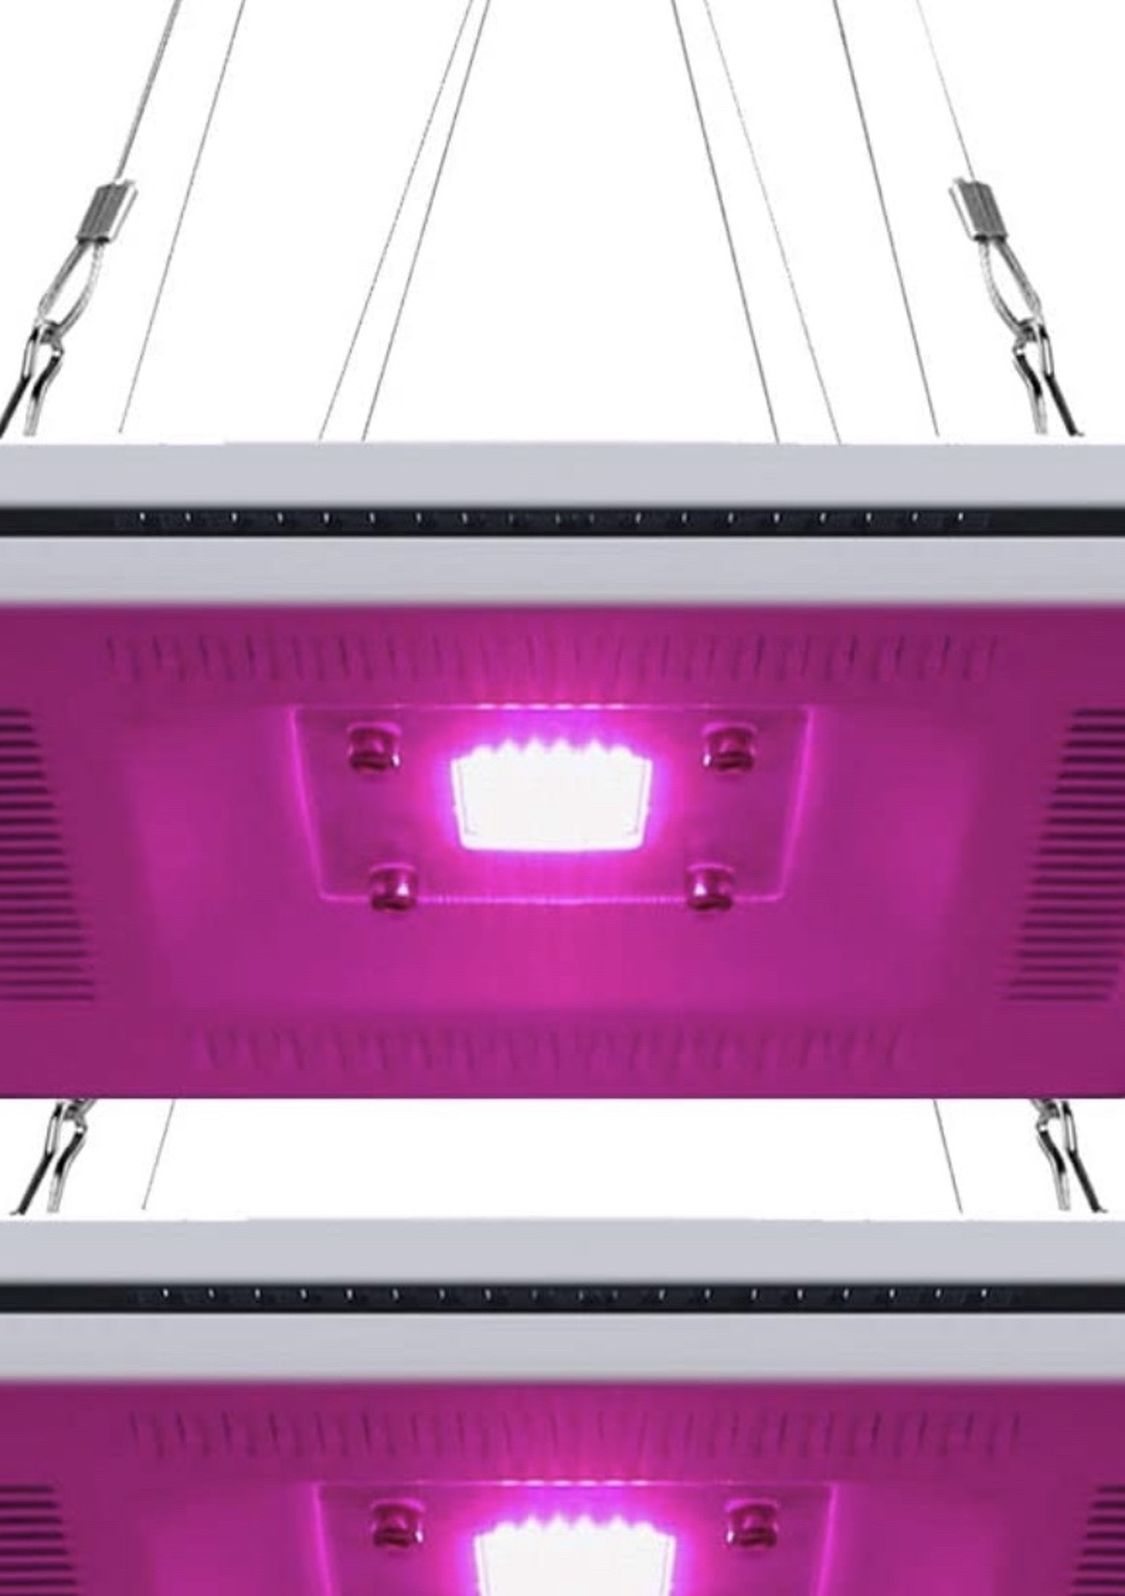 NEW! 2-Pack Professional Full Spectrum LED Grow Light, Total 600W HPS & CFL Grow Lights Equivalent, Best Panel Plant Grow Light for Indoor Plants in G